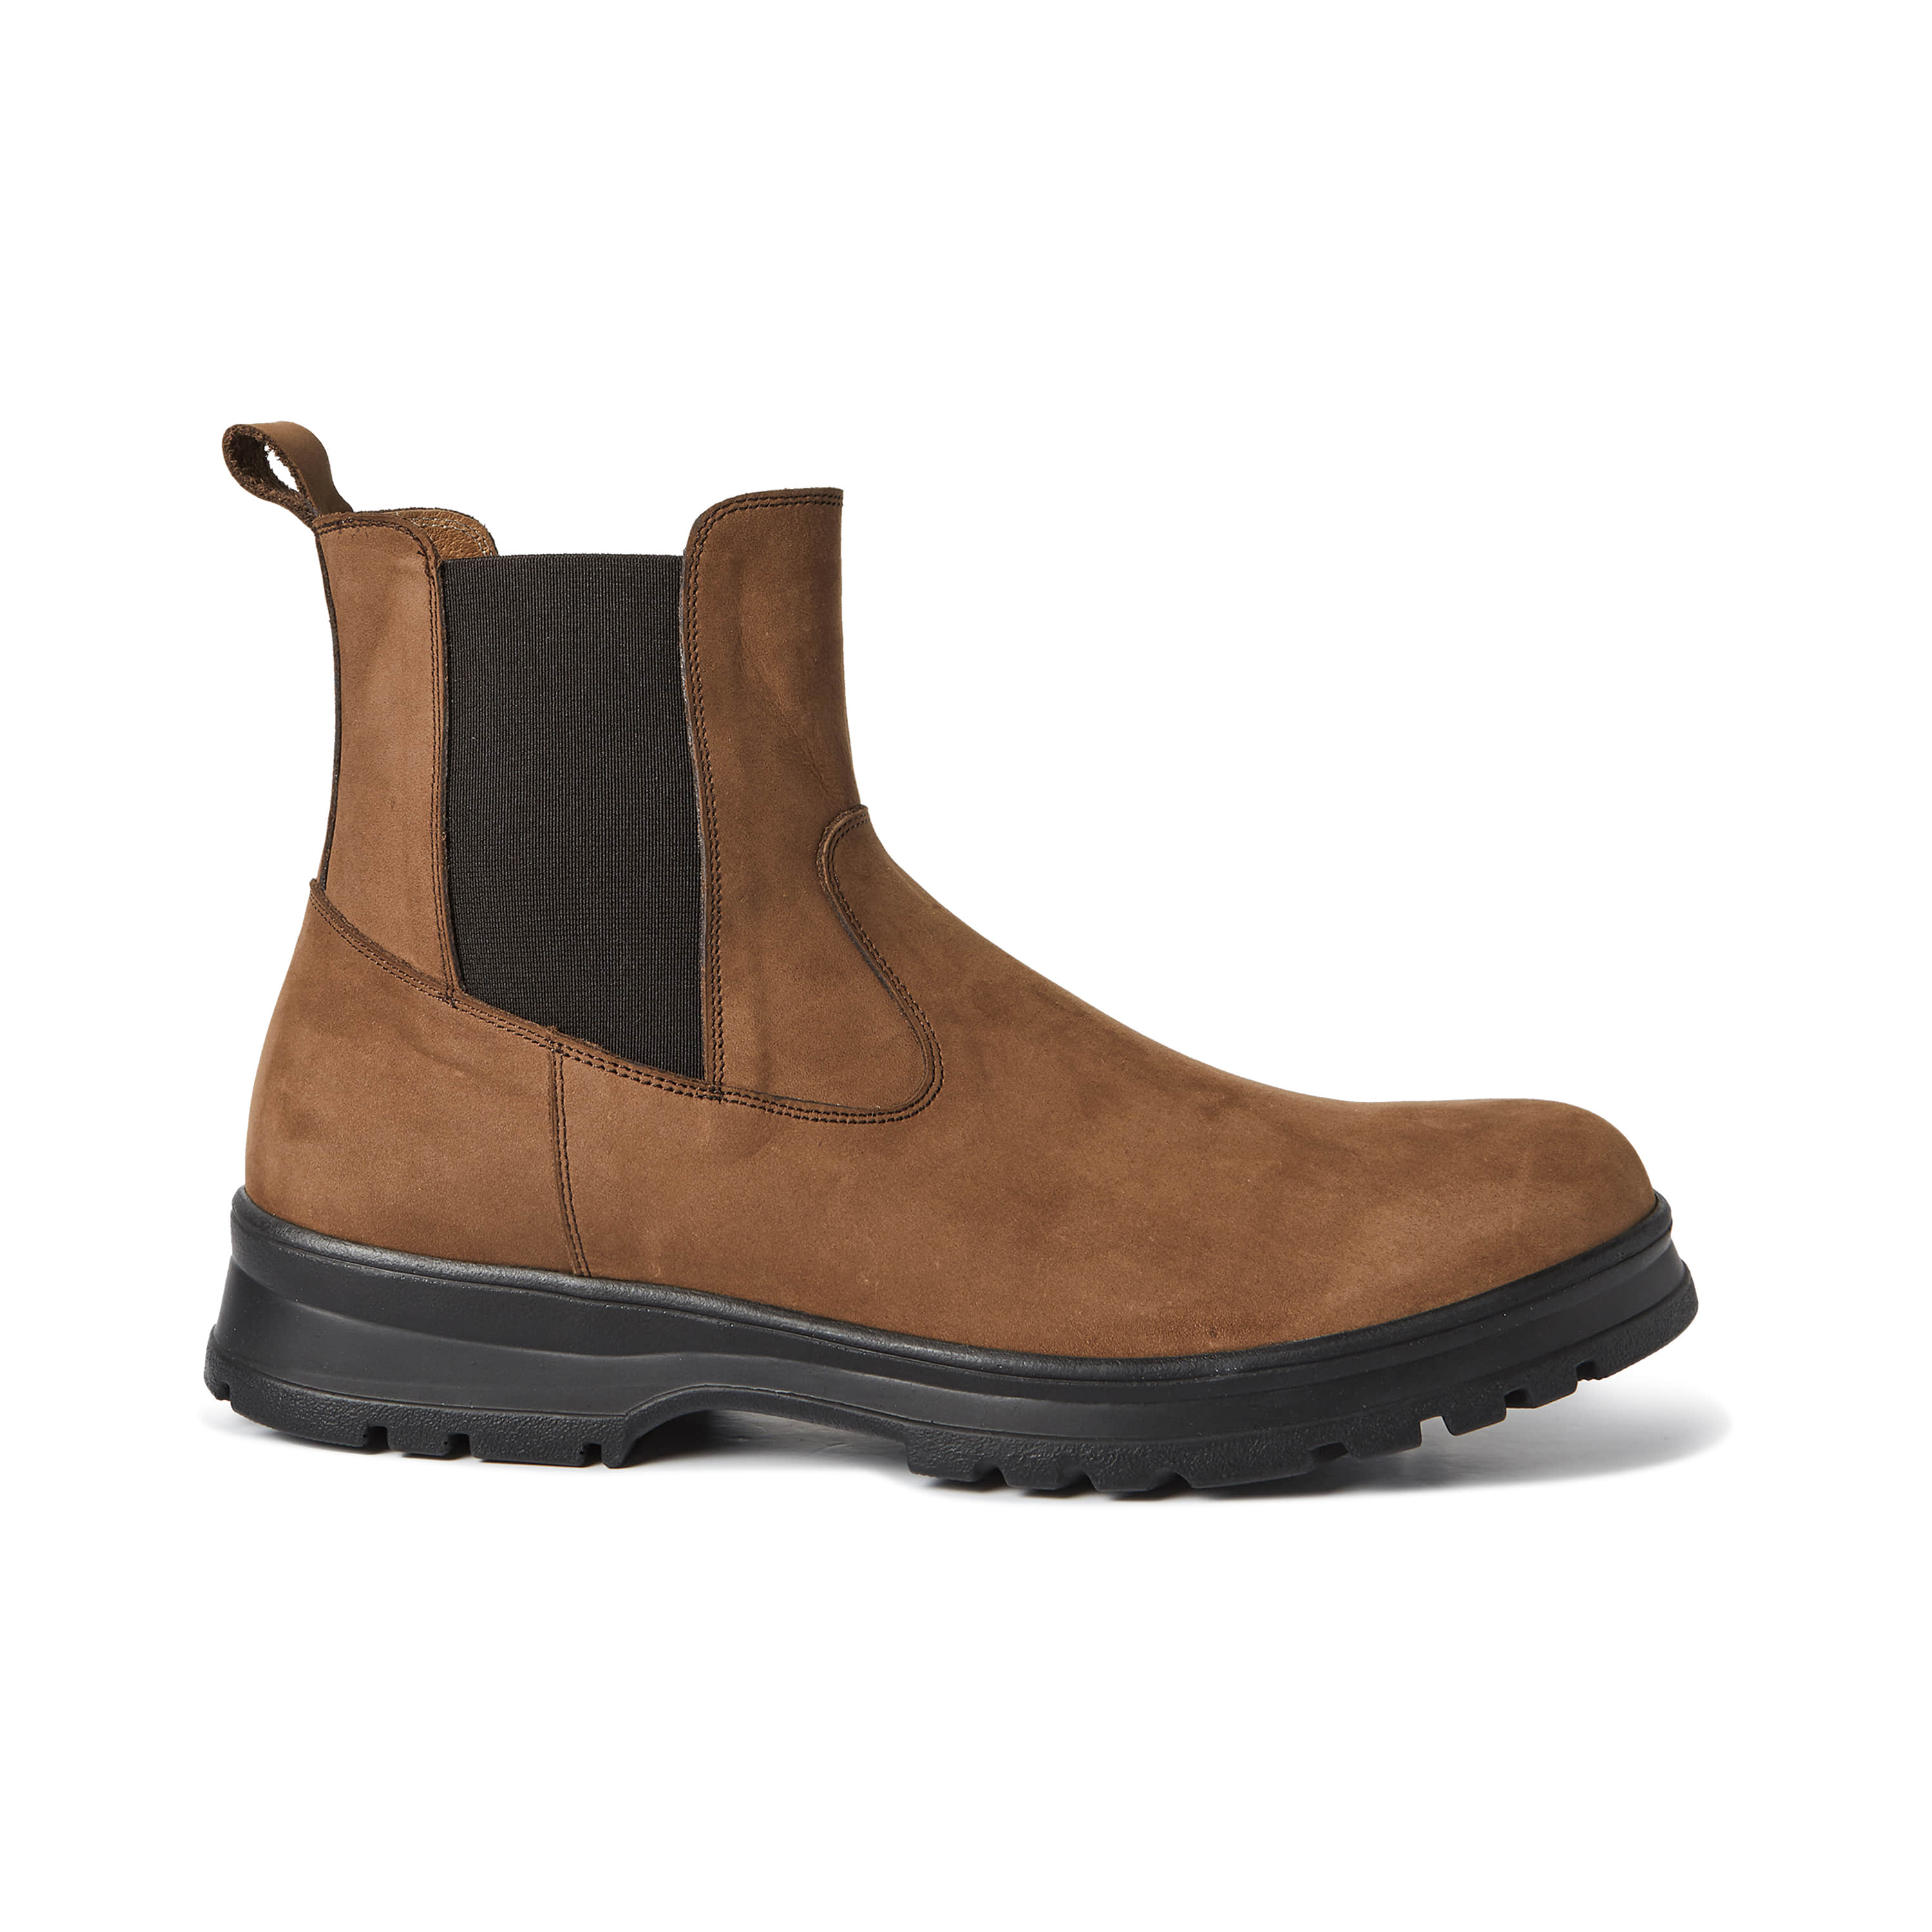 mmrb comfortable boots (brown)